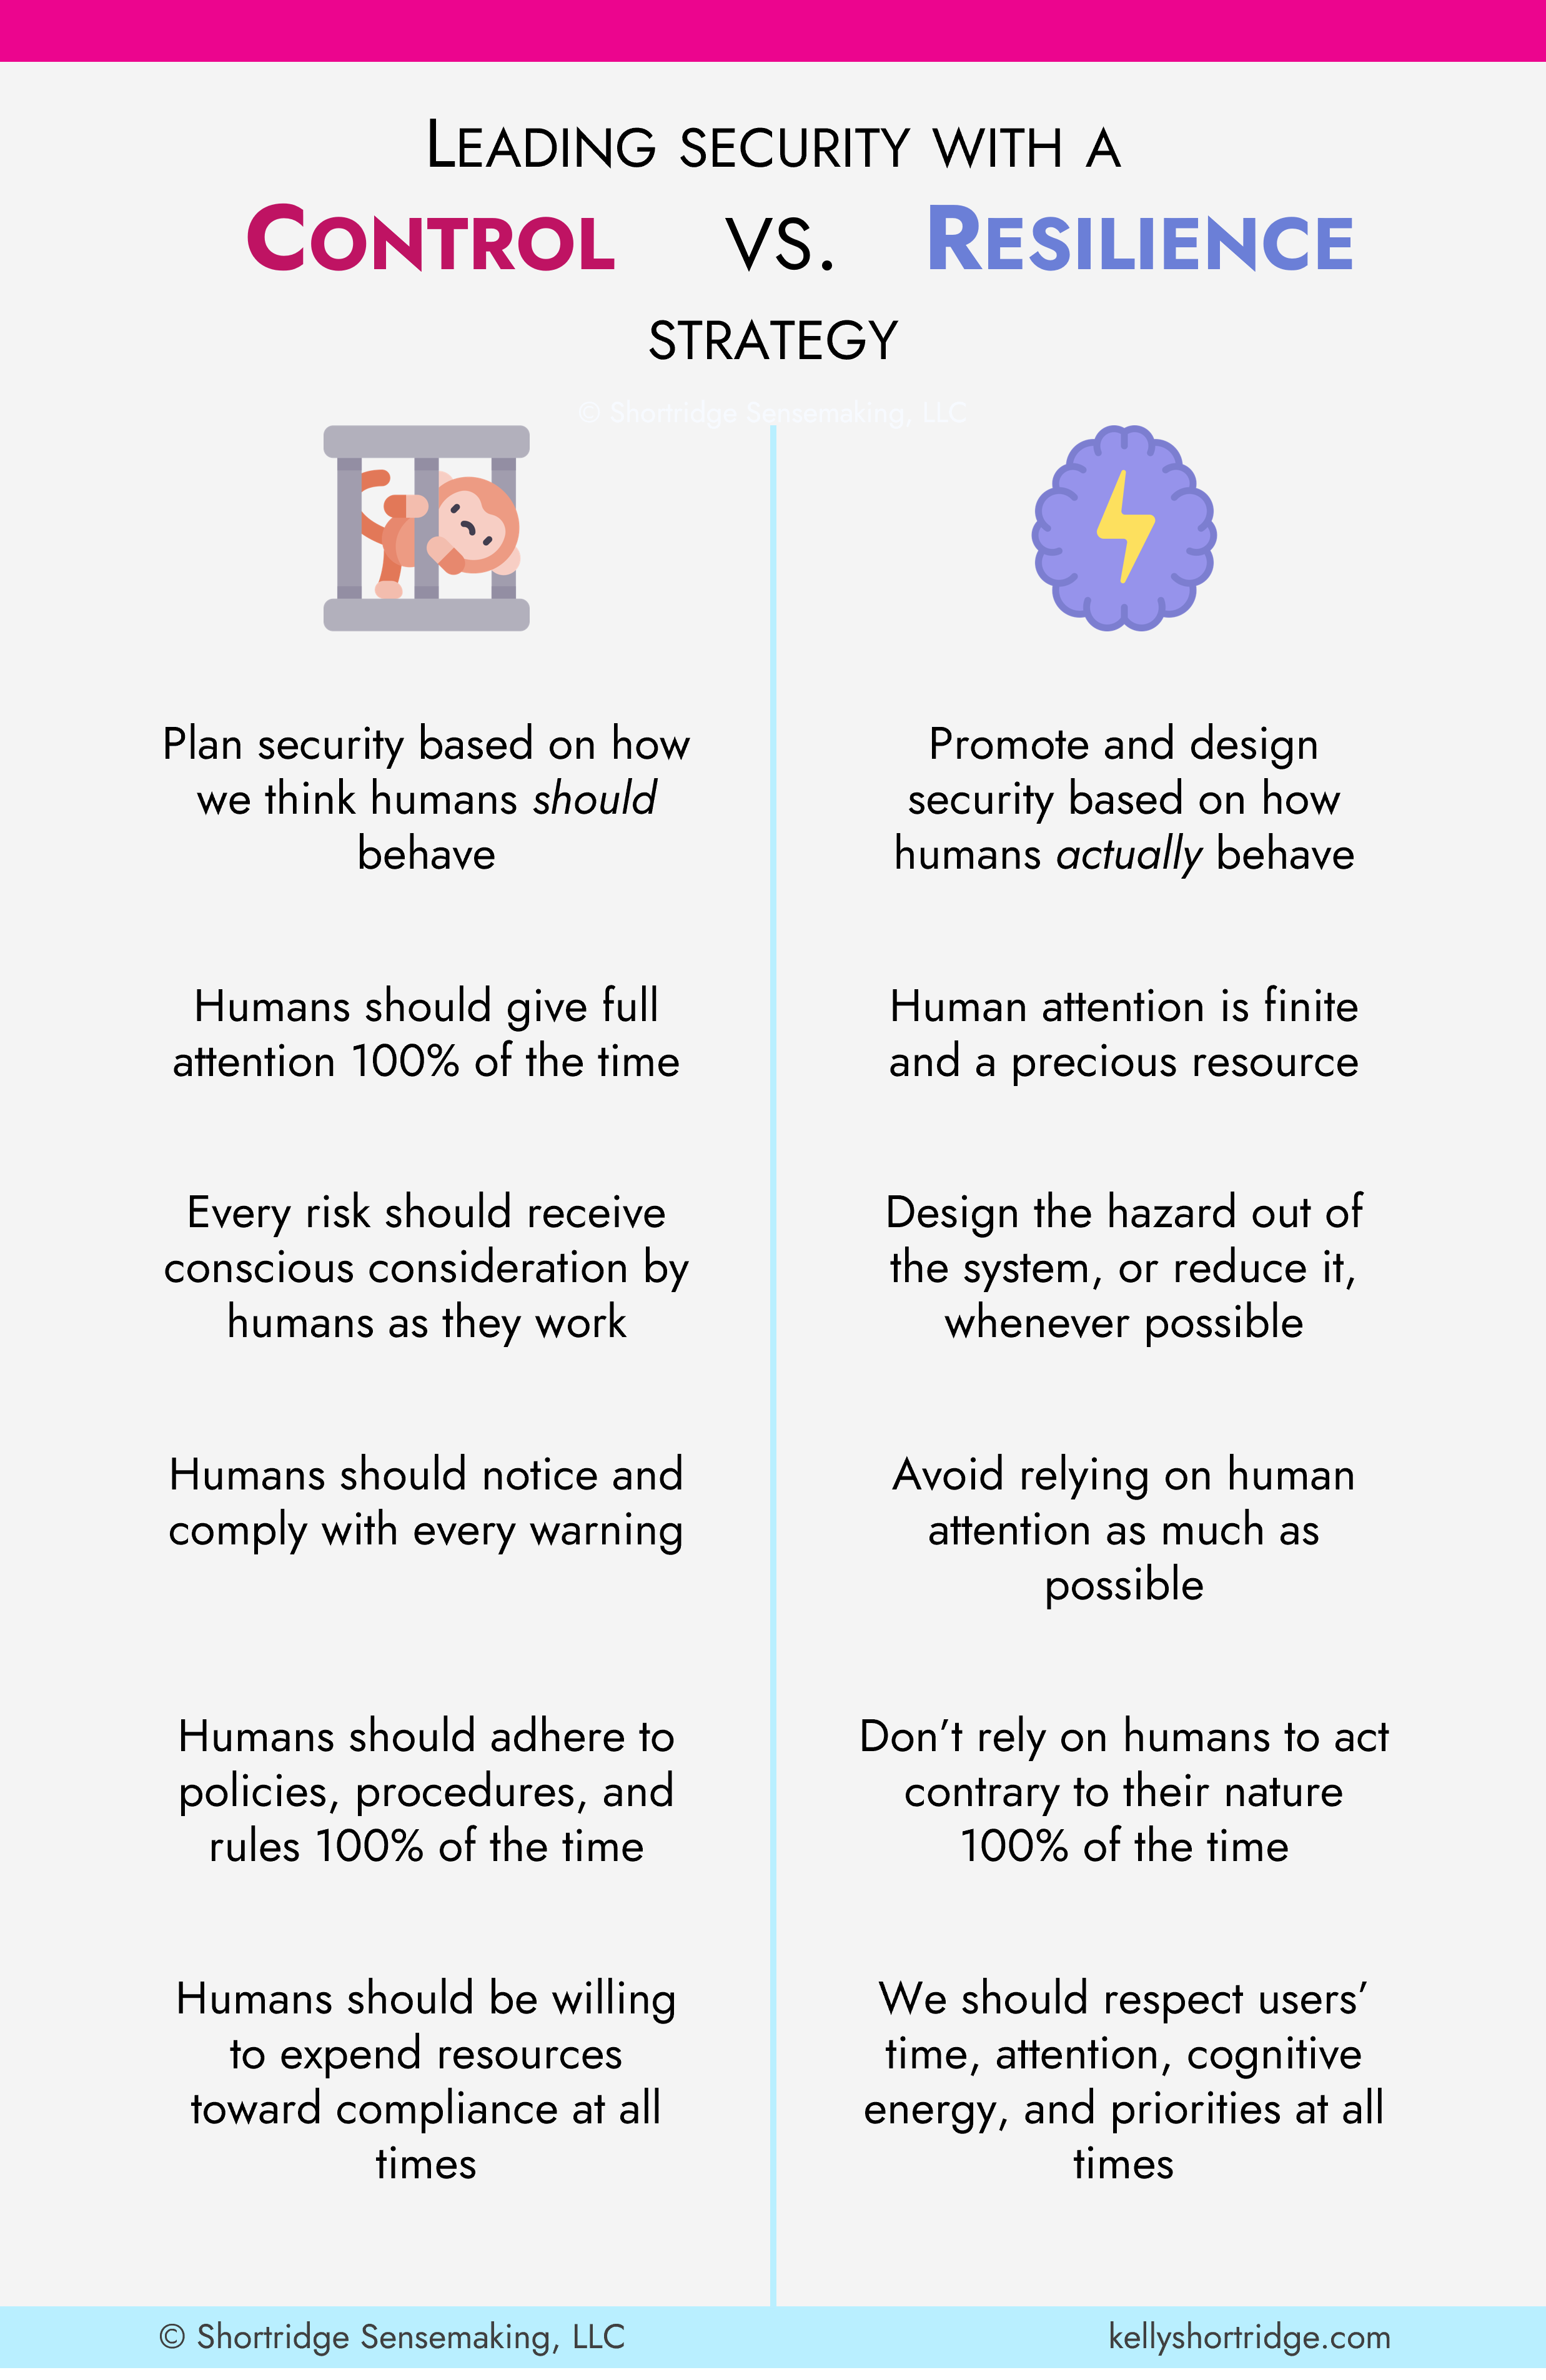 An infographic comparing the control vs. resilience strategy for cybersecurity. The control column includes Plan security based on how we think humans should behave, in contrast to the resilience strategy which says we should promote and design security based on how humans actually behave. The next row says the control strategy says humans should give full attention 100% of the time, while the resilience strategy says human attention is finite and a precious resource. Next, the control strategy says every risk should receive conscious consideration by humans as they work, while the resilience strategy says we should design the hazard out of the system, or reduce it, whenever possible. Next, the control strategy says humans should notice and comply with every warning, while the resilience strategy says we should avoid relying on human attention as much as possible. Next, the control strategy says humans should adhere to policies, procedures, and rules 100% of the time, while the resilience strategy says we shouldn&rsquo;t rely on humans to act contrary to their nature 100% of the time. Finally, the control strategy says humans should be willing to expend resources towards compliance at all costs, while the resilience strategy says we should respect users&rsquo; time, attention, cognitive energy, and priorities at all times.